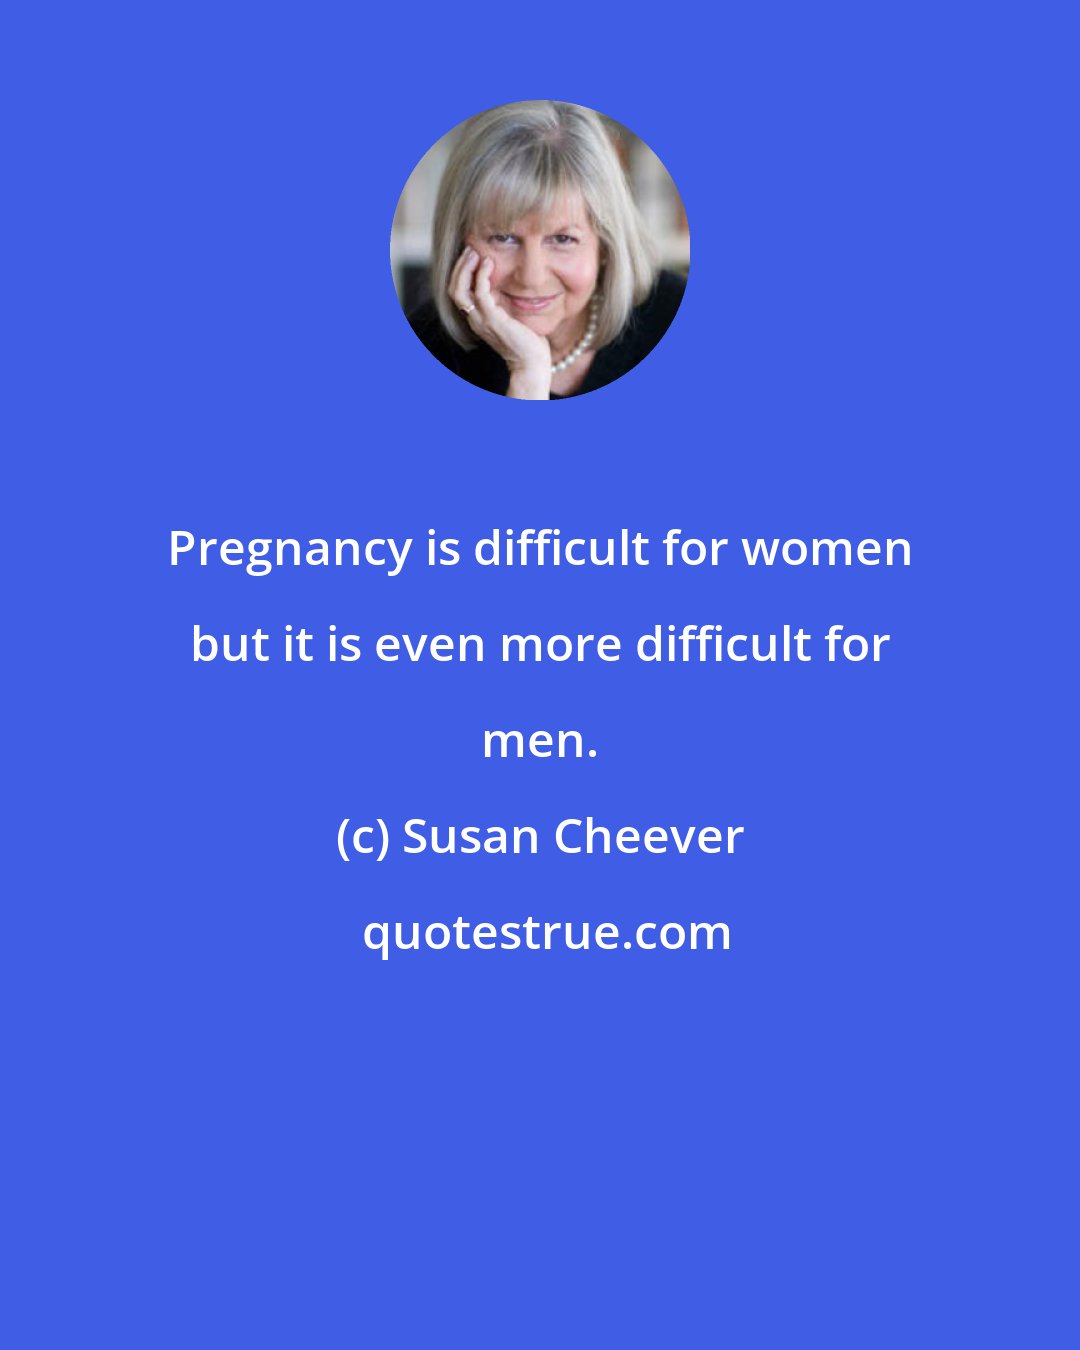 Susan Cheever: Pregnancy is difficult for women but it is even more difficult for men.